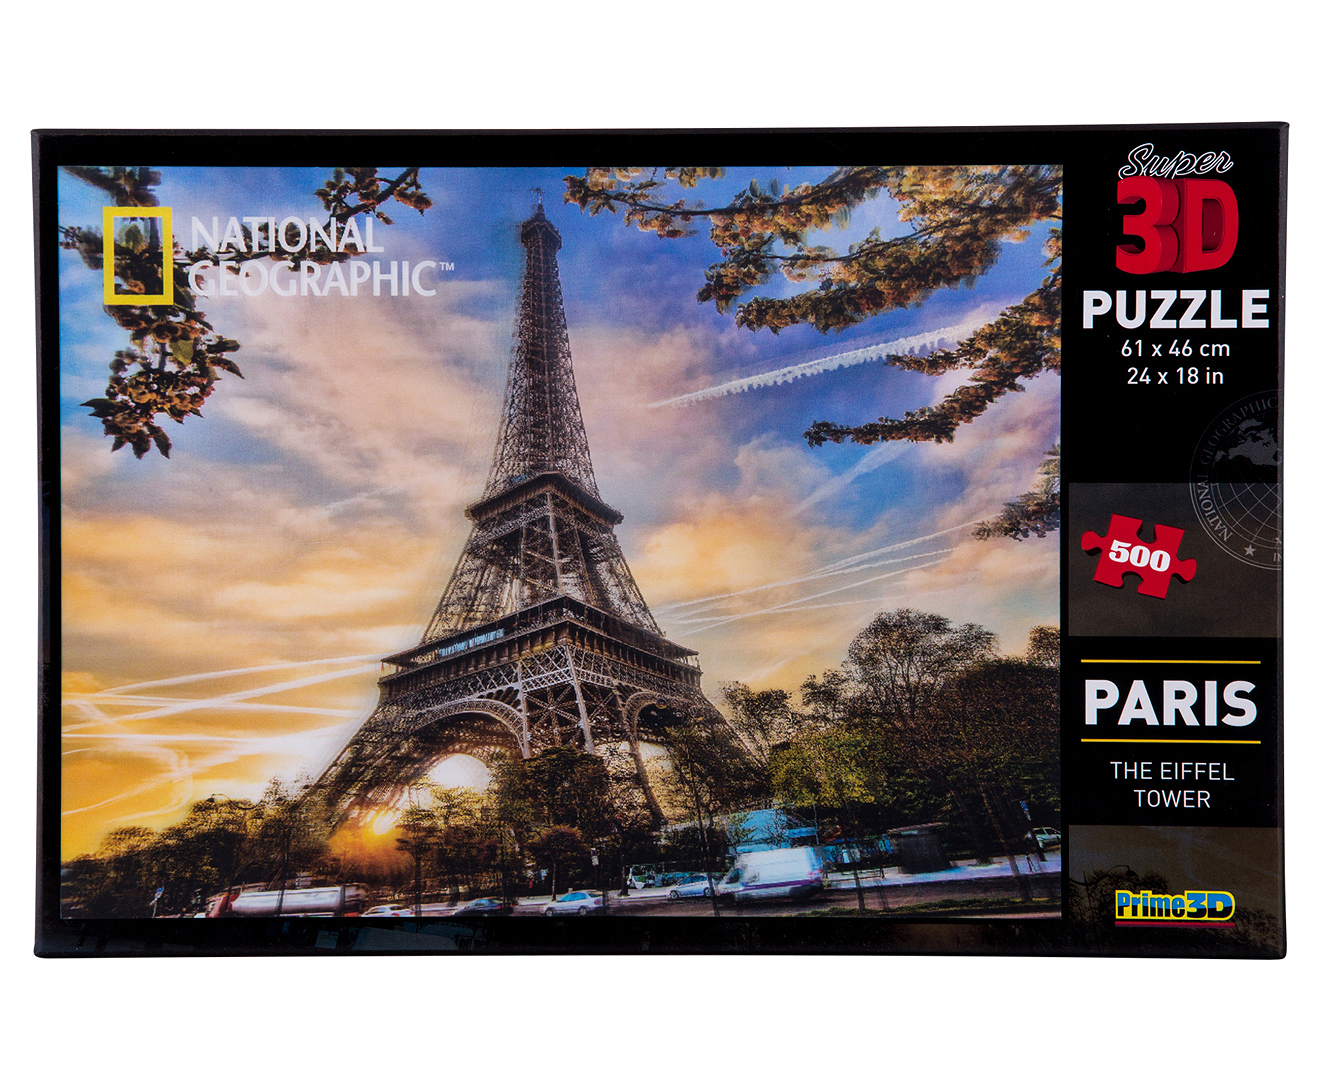 online jigsaw puzzles free national geographic